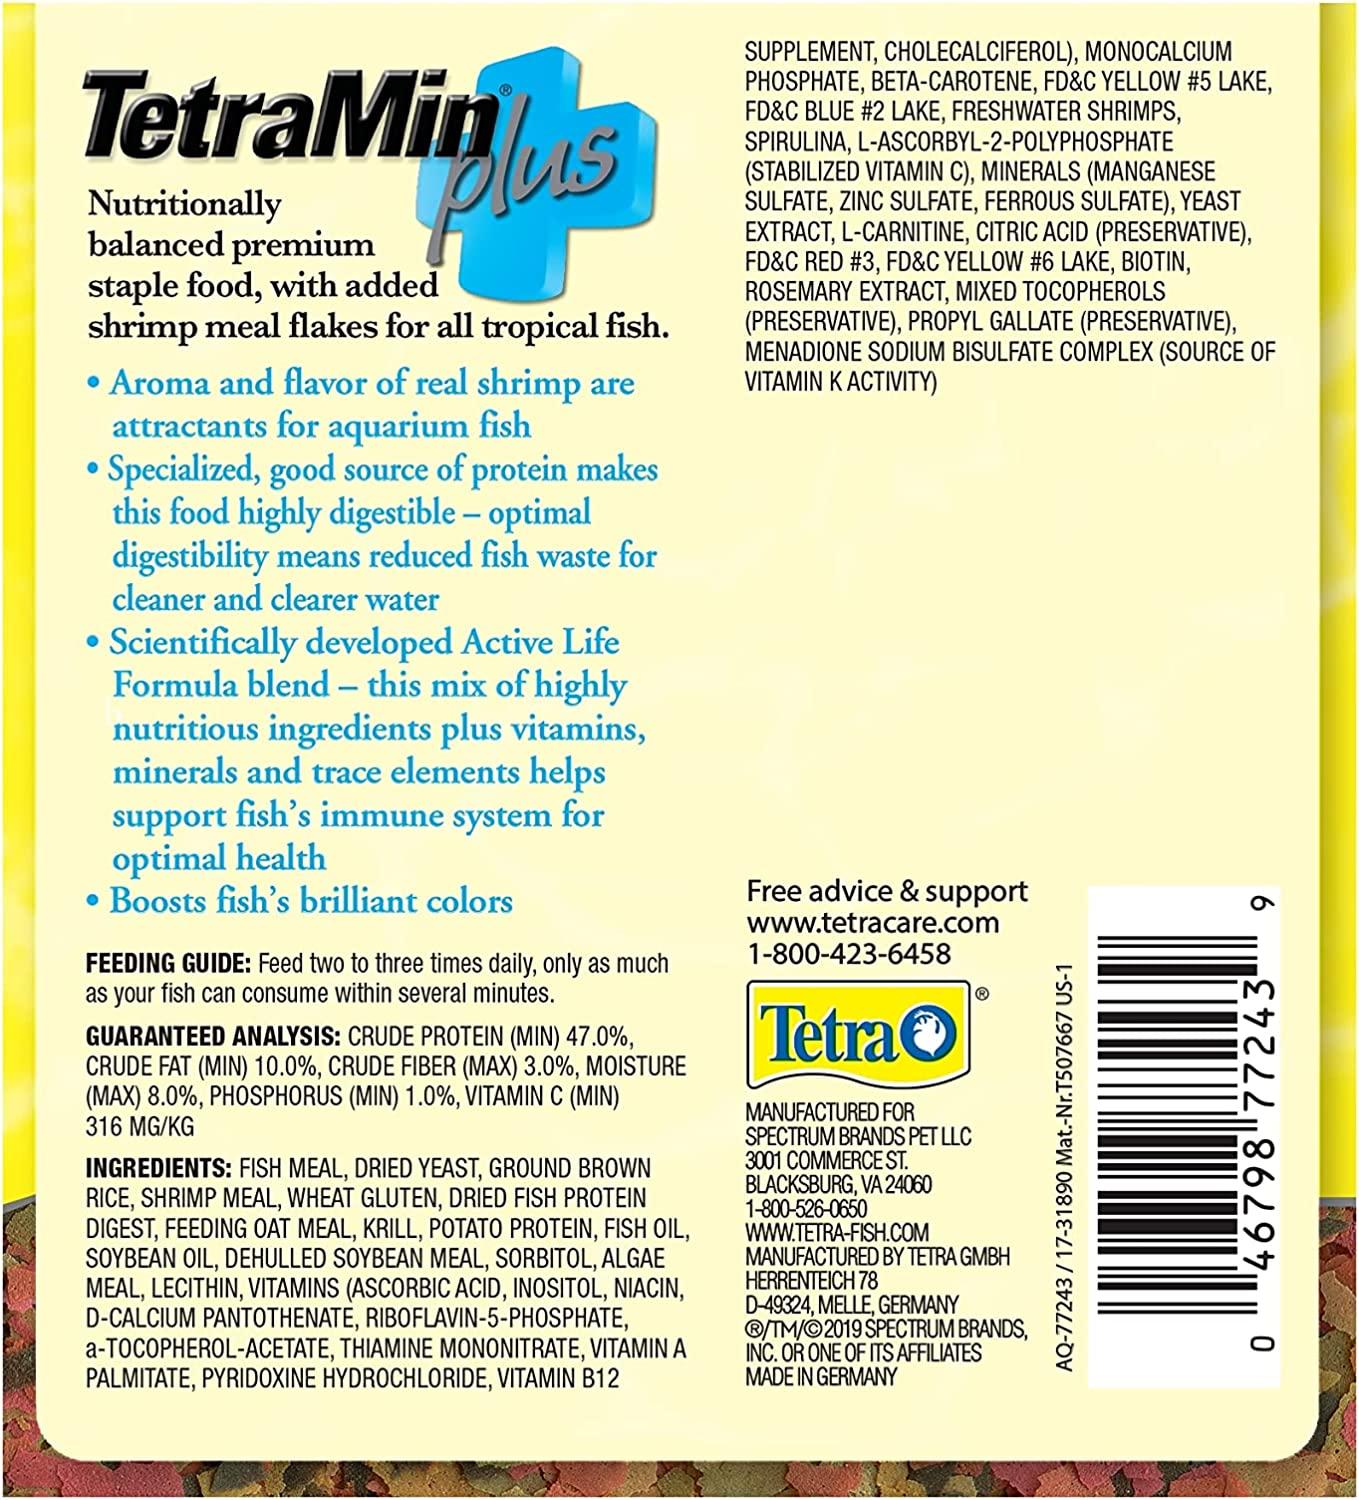 TetraMin Plus: The Best of the Tetra Tropical Flake Foods?